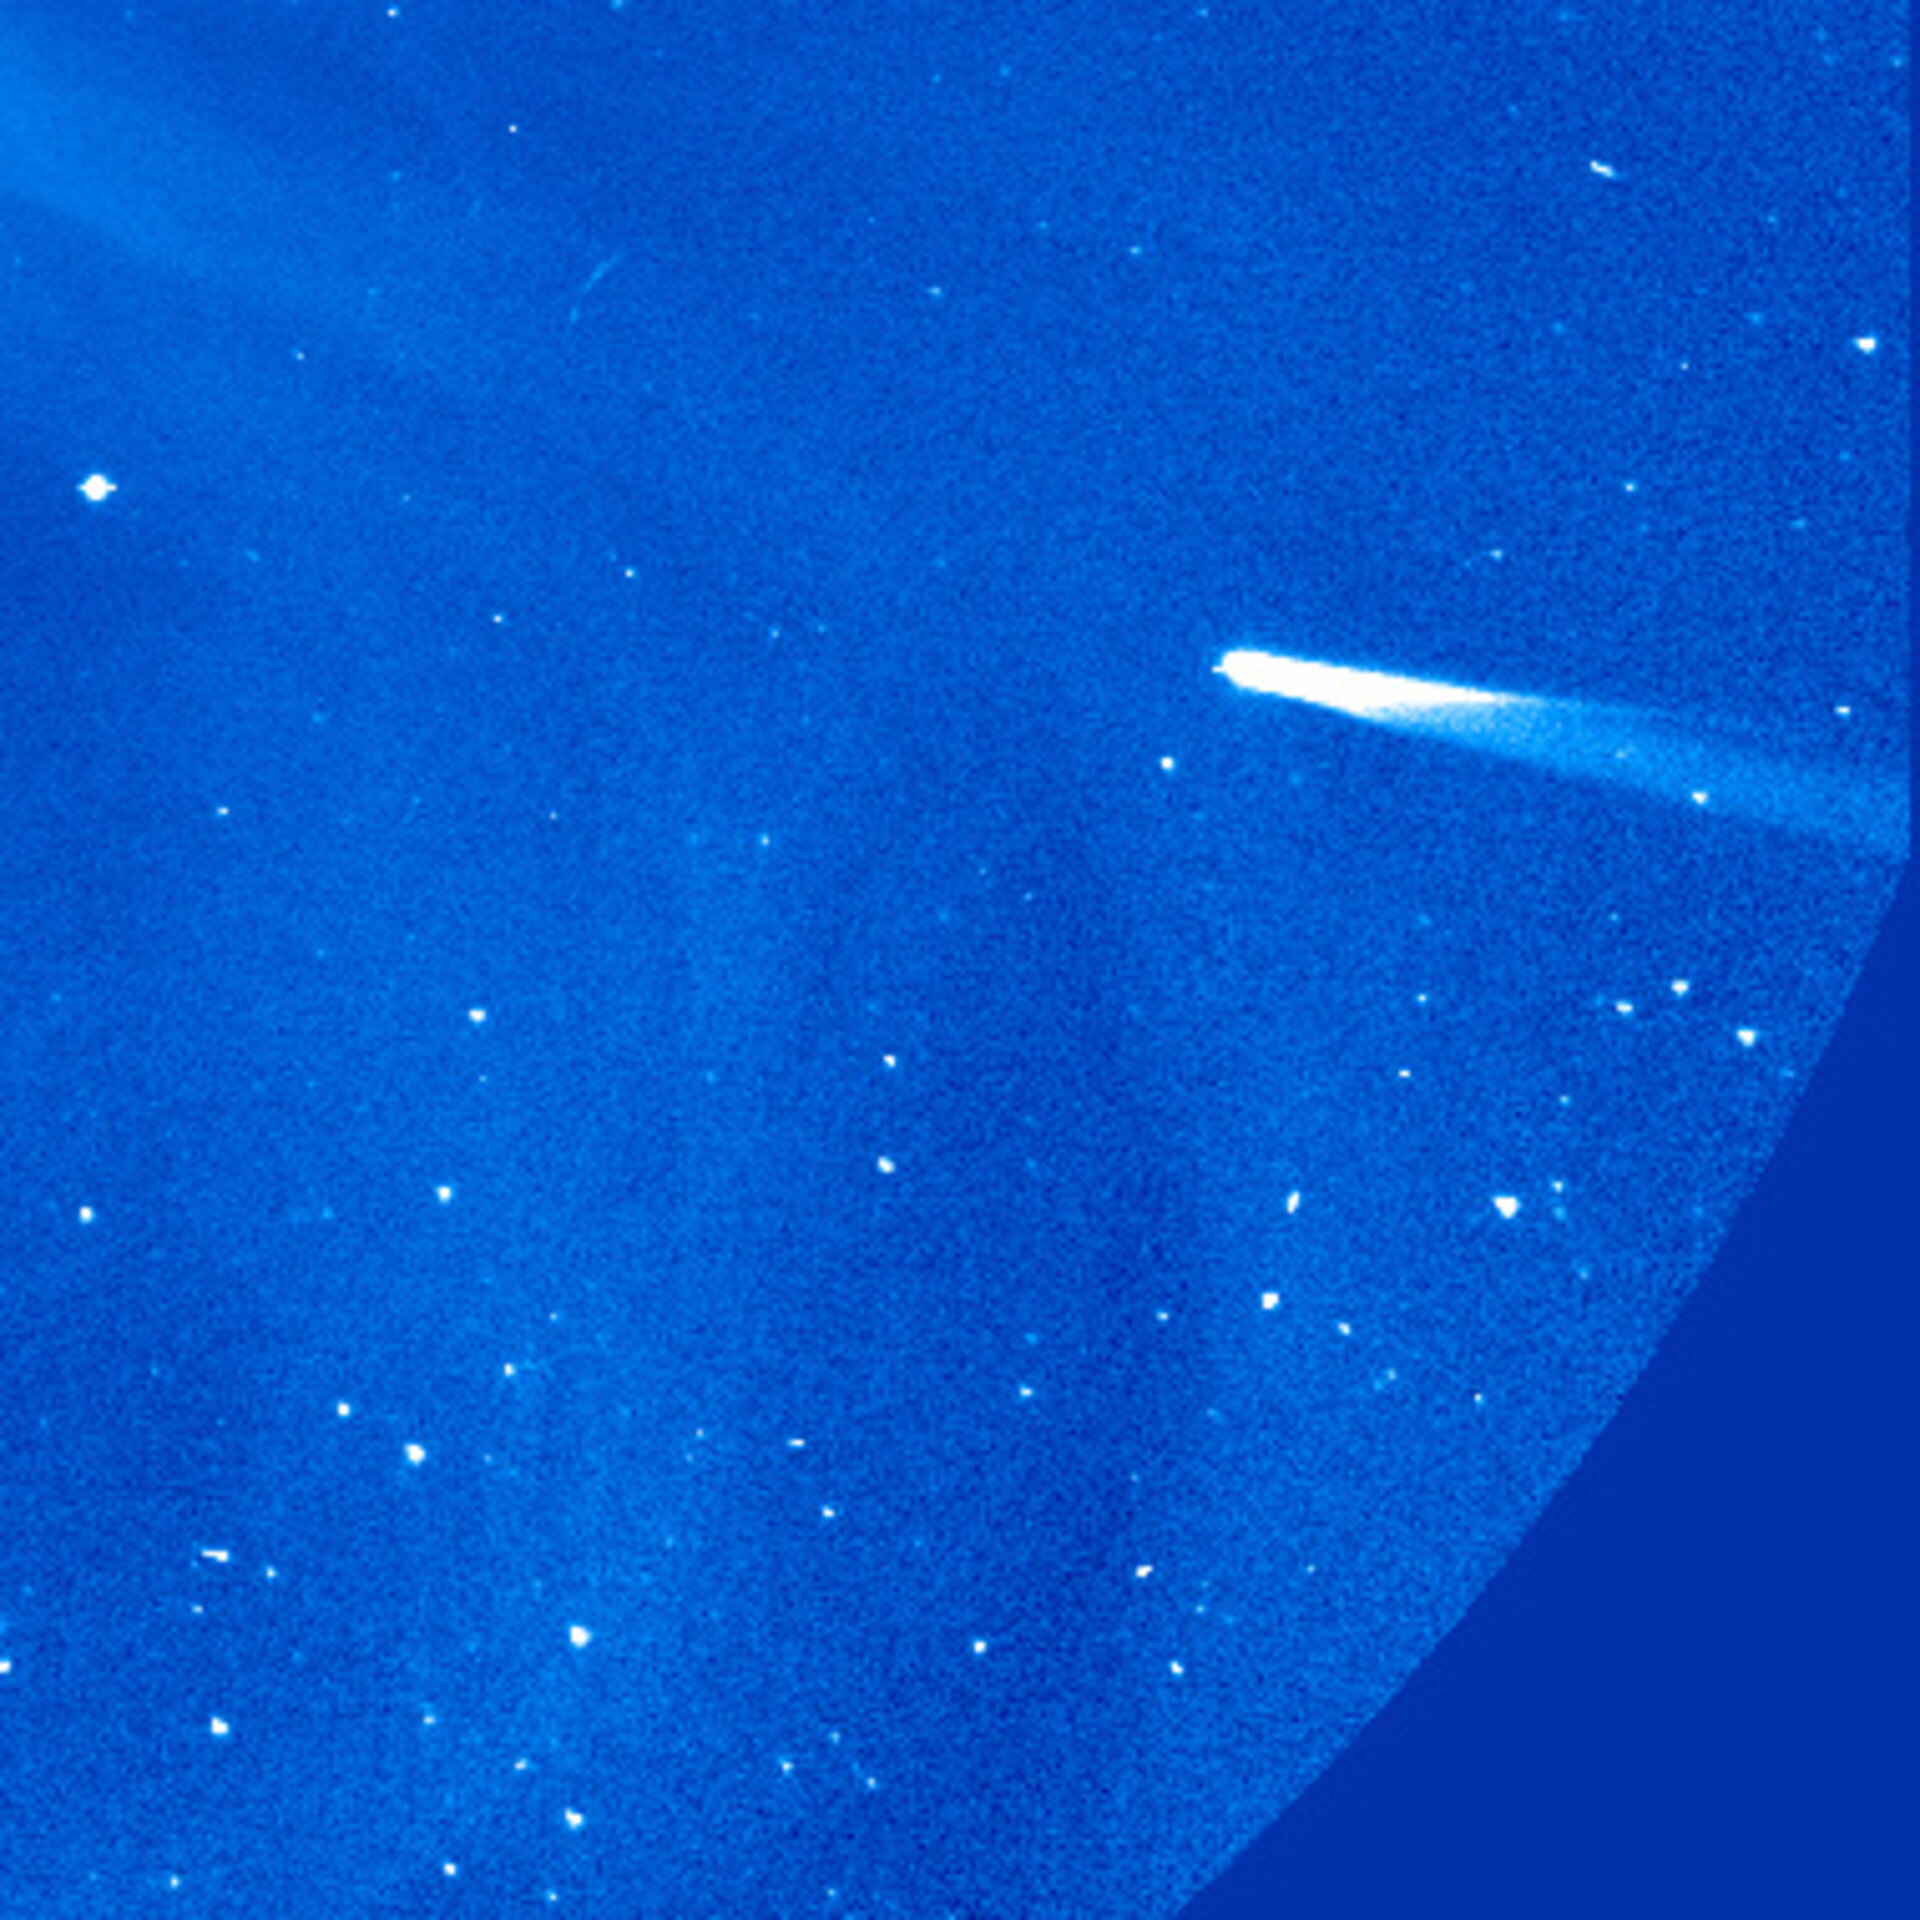 Comet ISON approaches the Sun